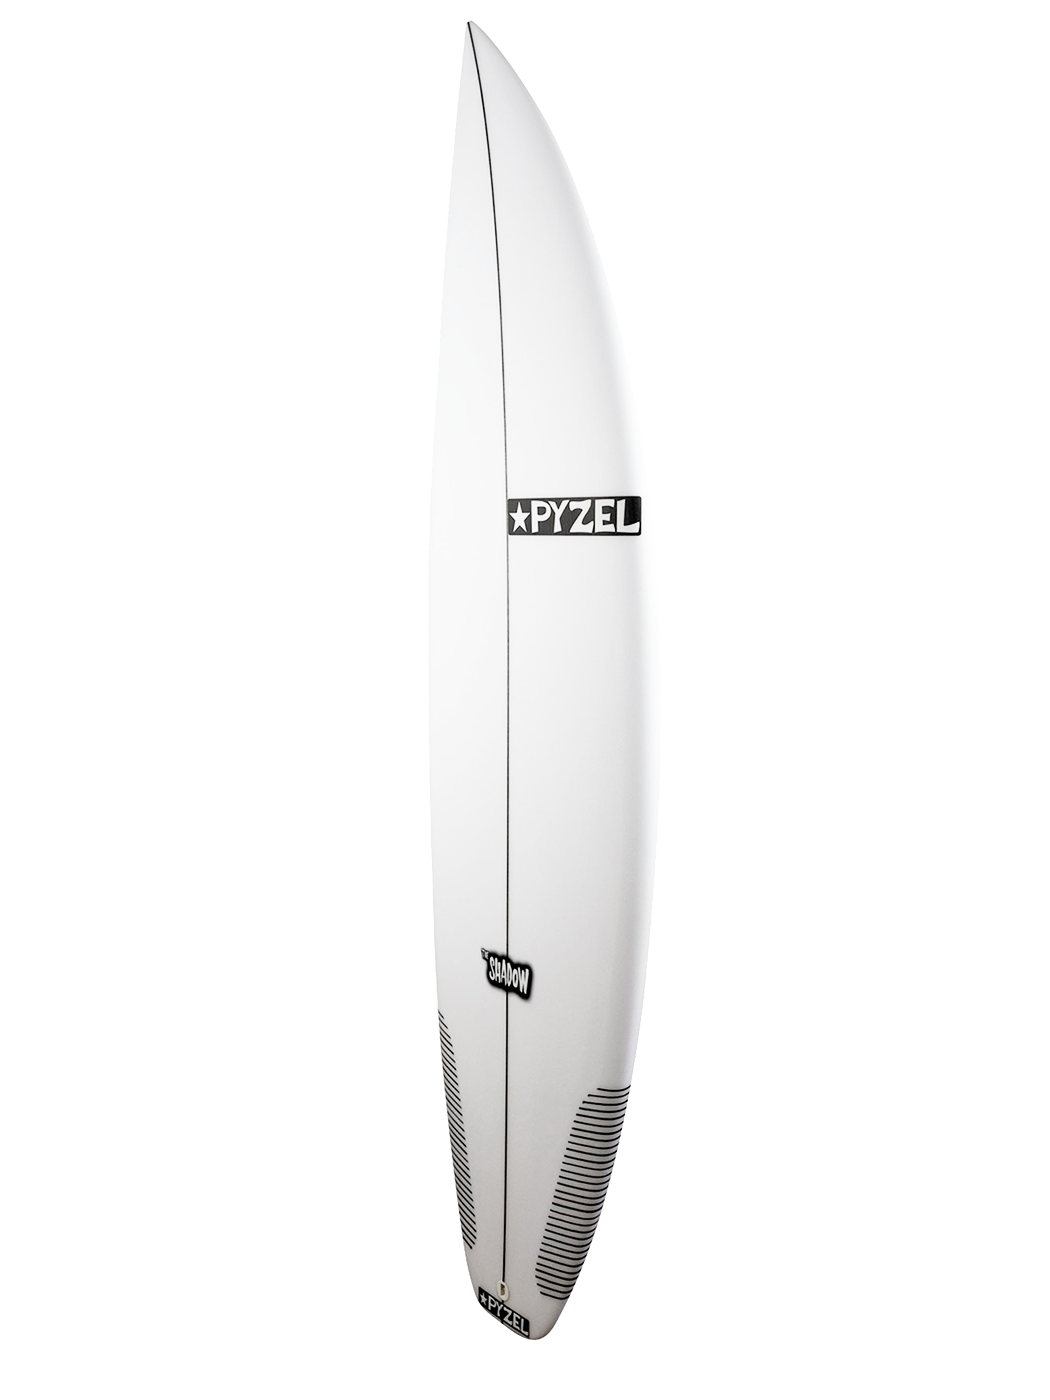 Pyzel Surfboards - Grom Shadow